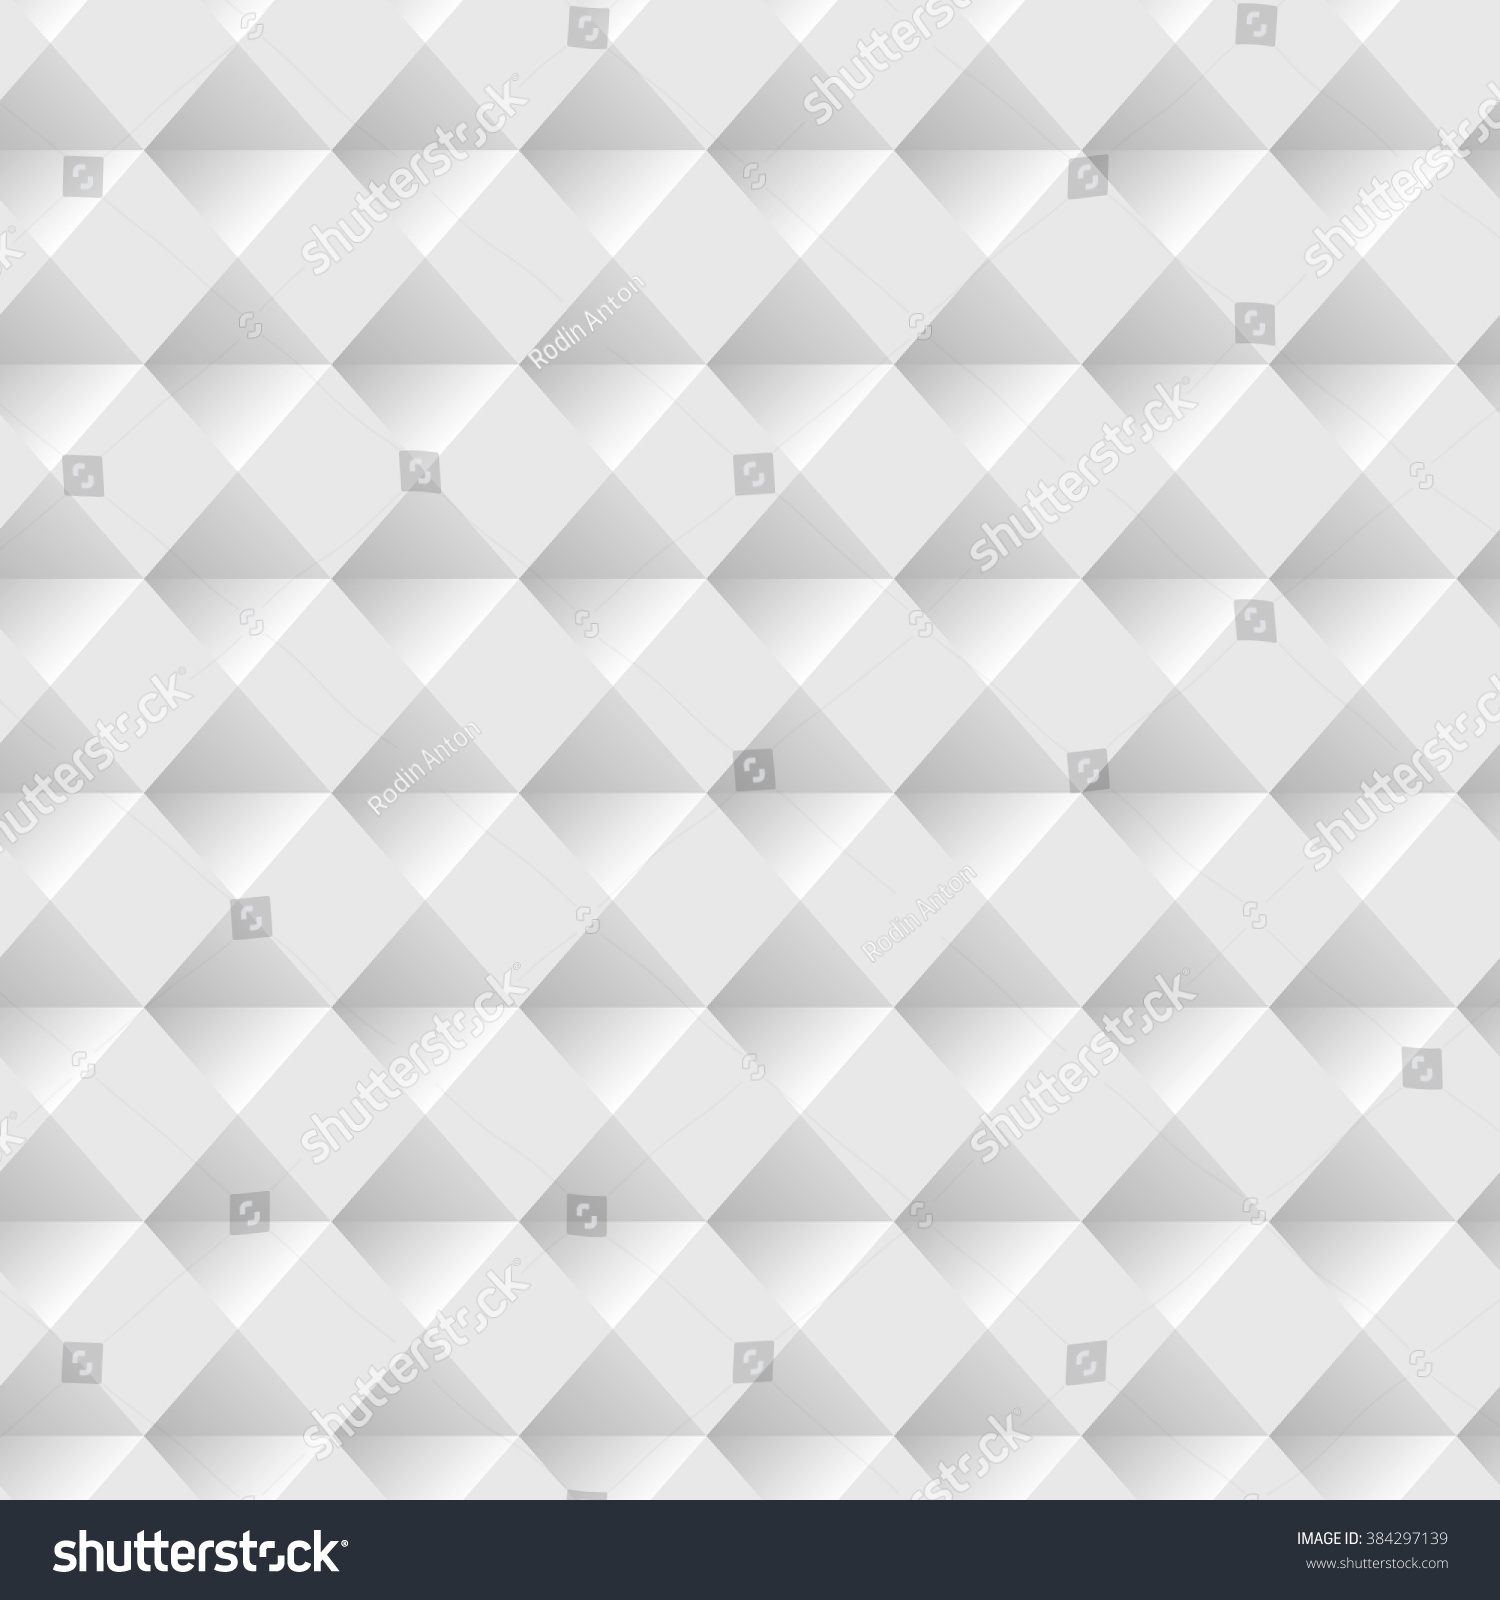 White Seamless Geometric Pattern Vector Background Stock Vector ...